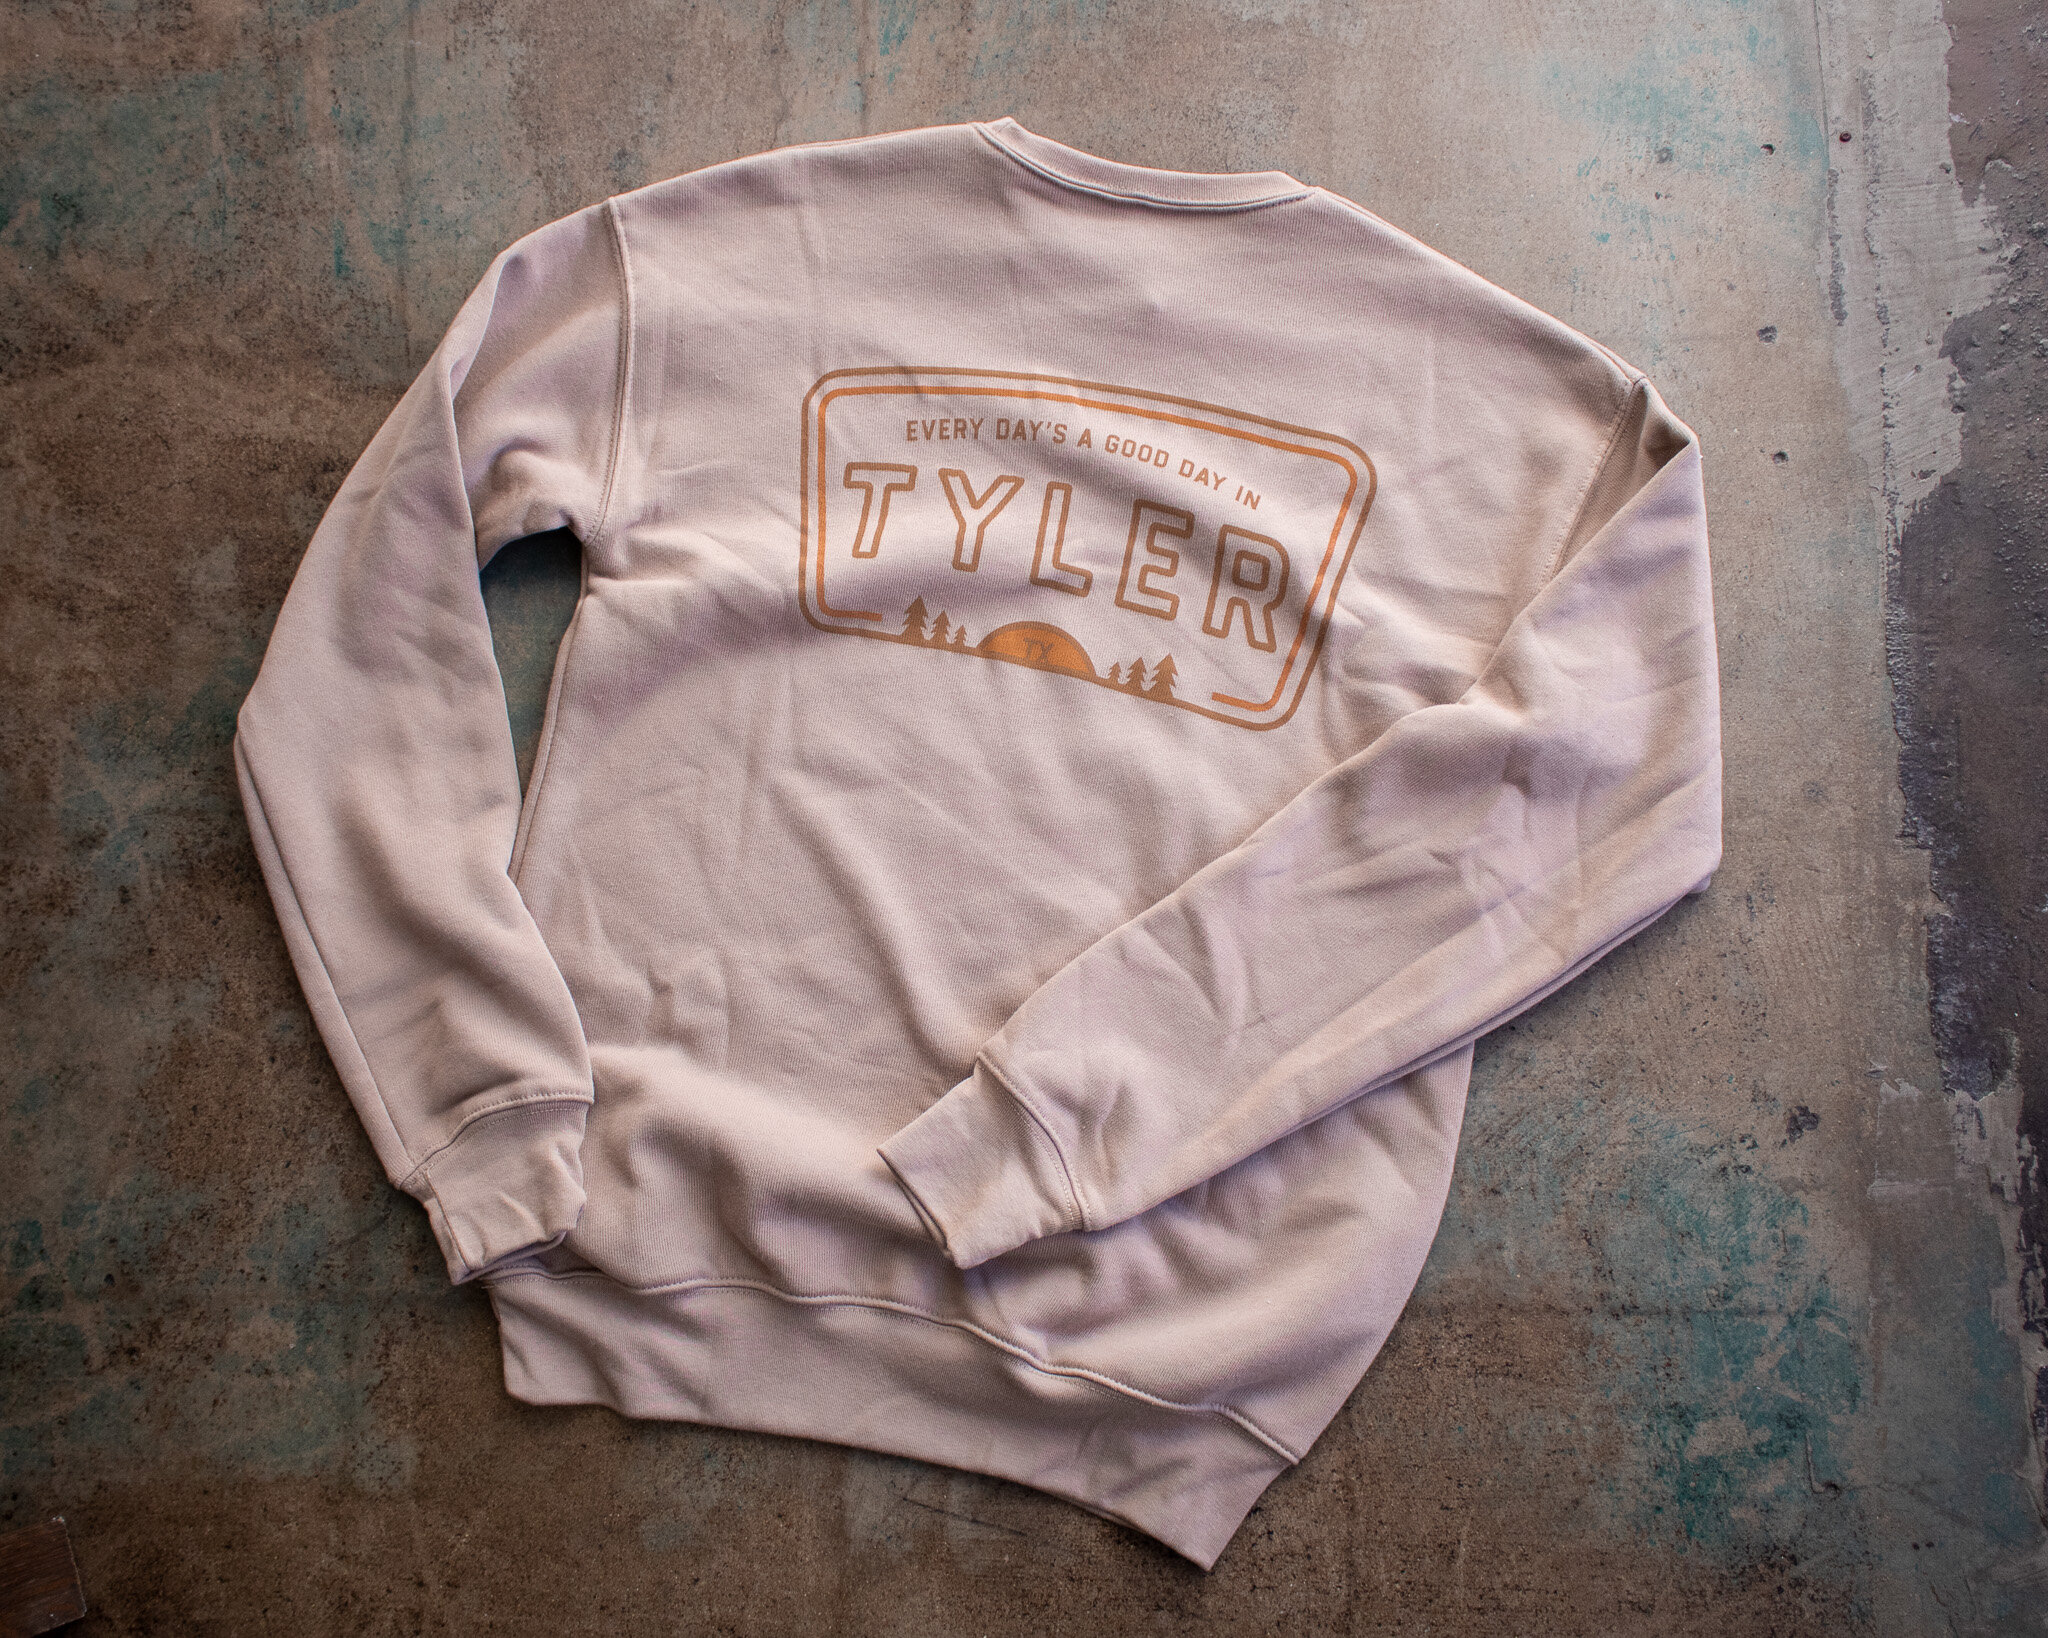 ☀️ Every day is a good day in Tyler, Texas! ☀️

These super soft and cozy sweatshirts make for the perfect gift this season. Come see us, and we'll even toss in some free stickers!

 #apparel #easttexas #appareldesign #shirts #shirtdesign #texas #sho